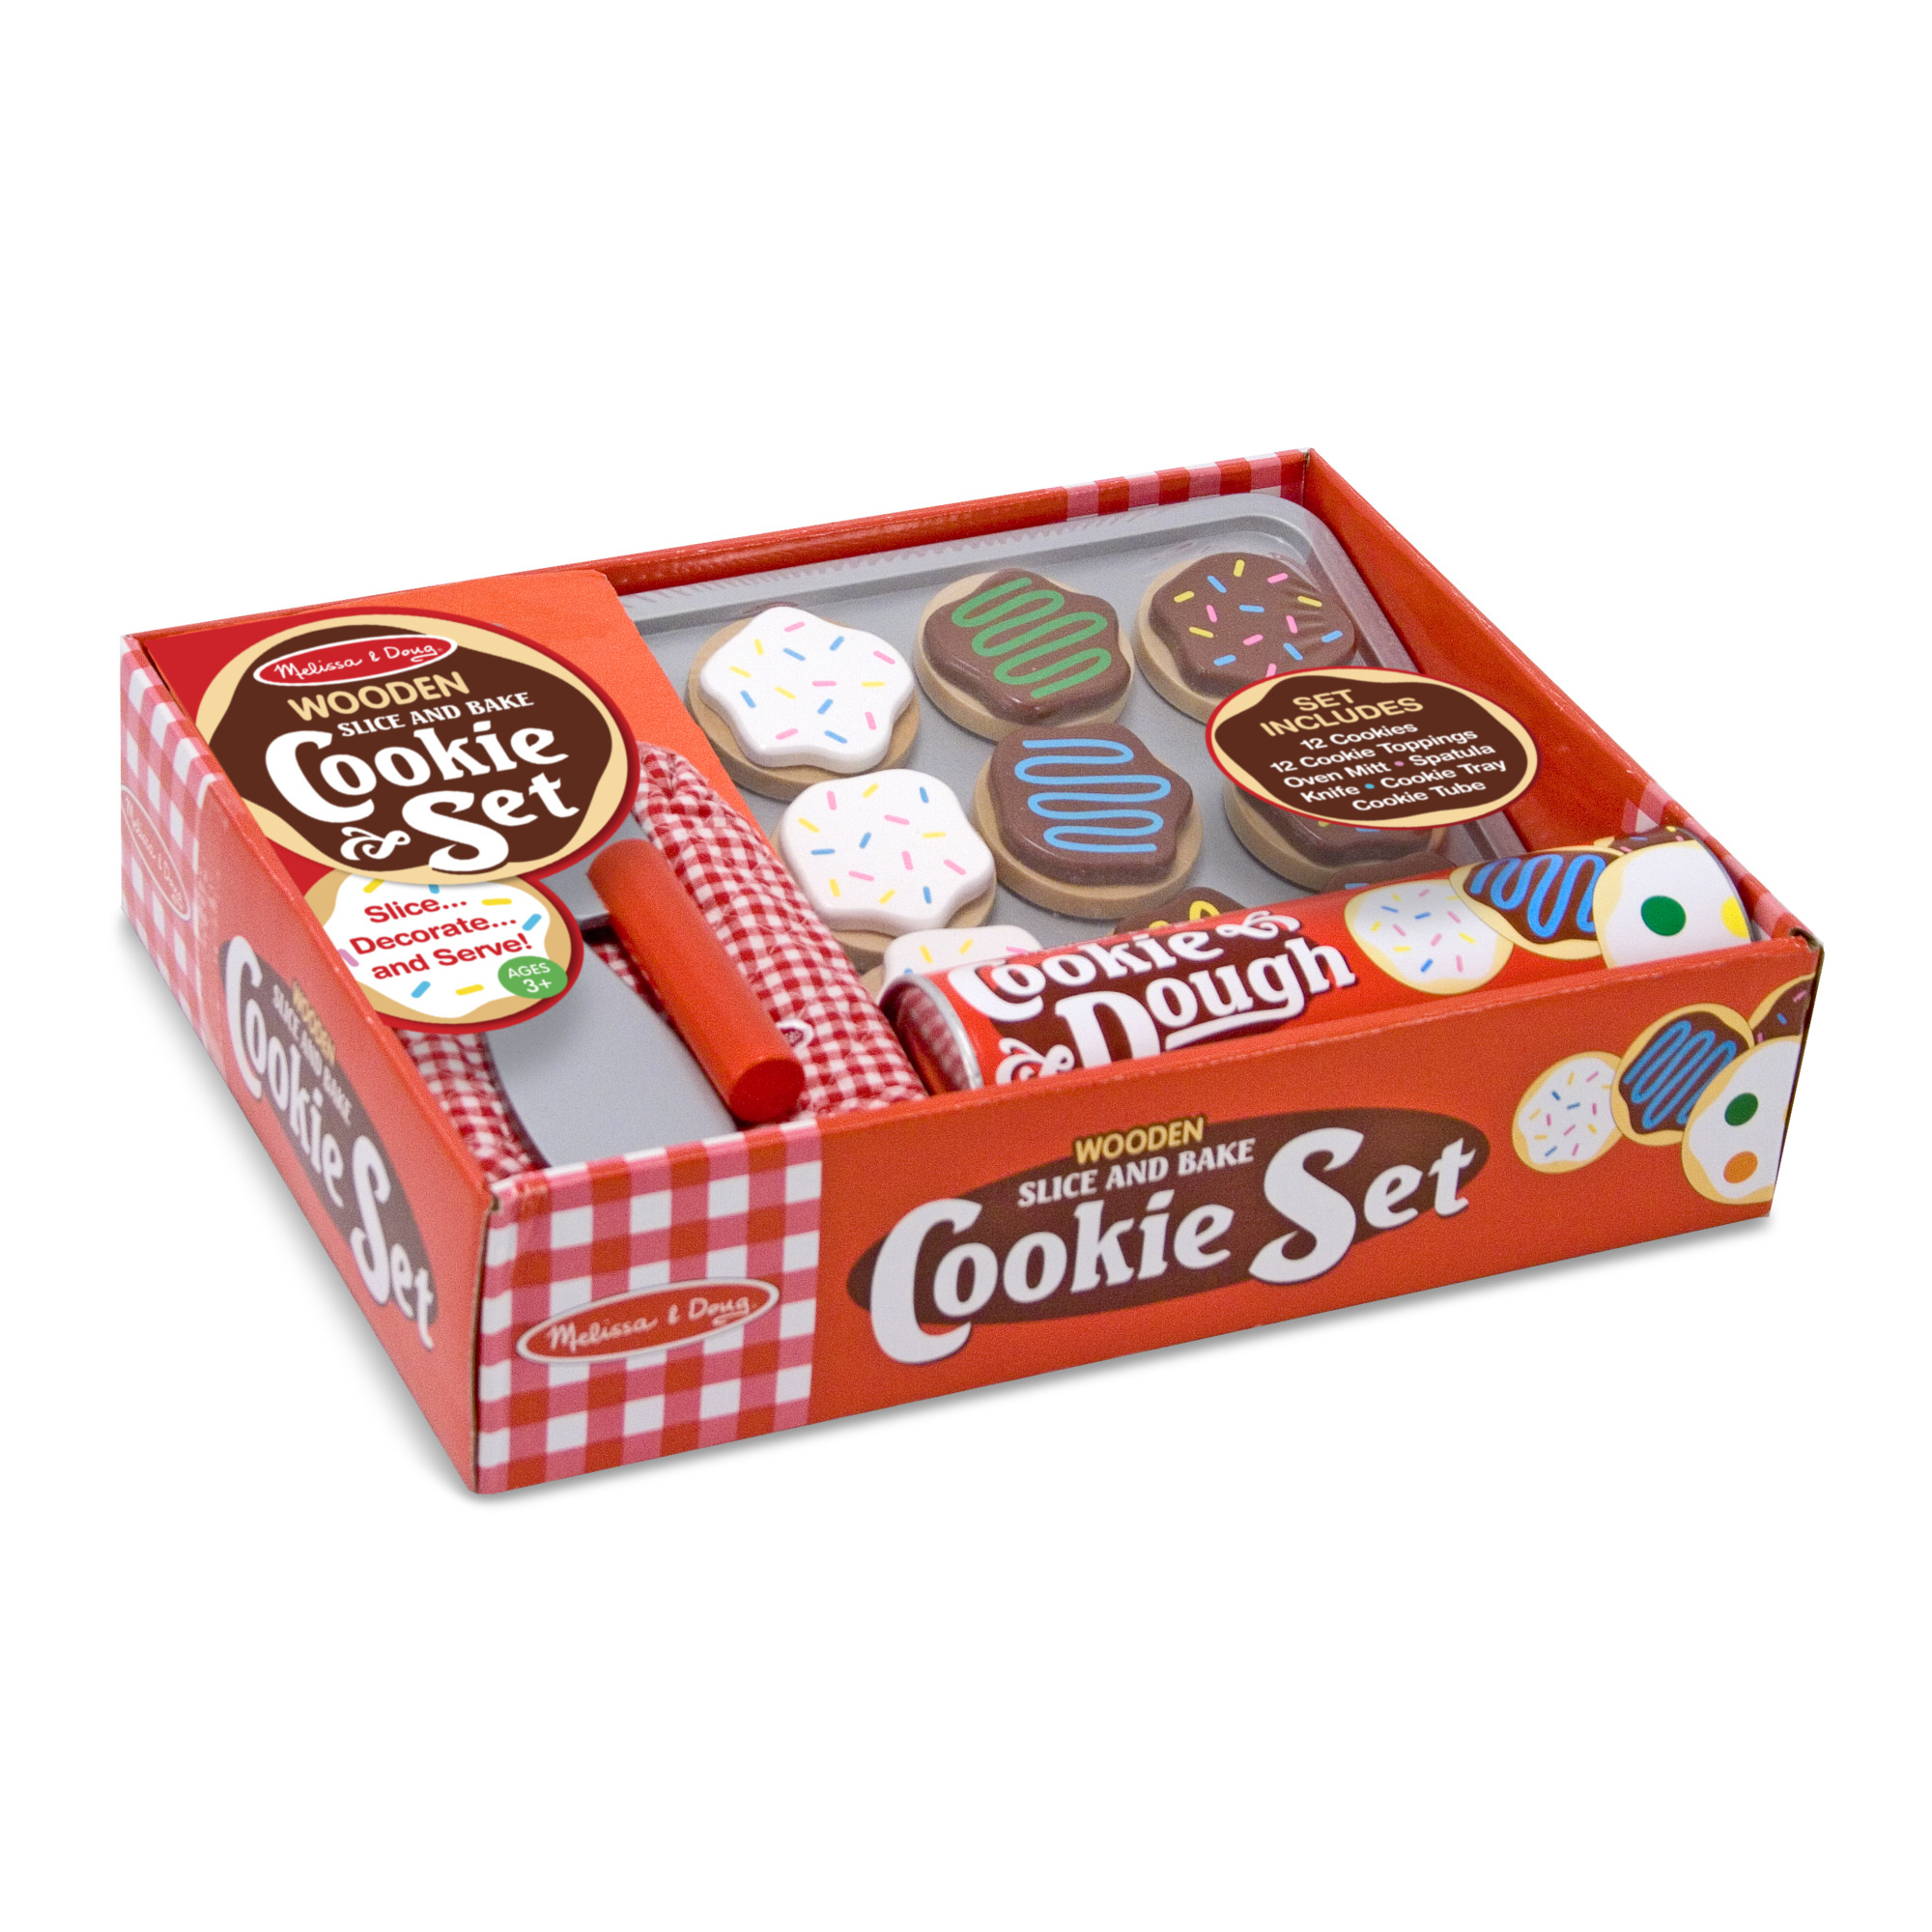 Slice-and-bake Wooden Cookie Play Food Set, Pretend Play, Materials, 28 Pieces,